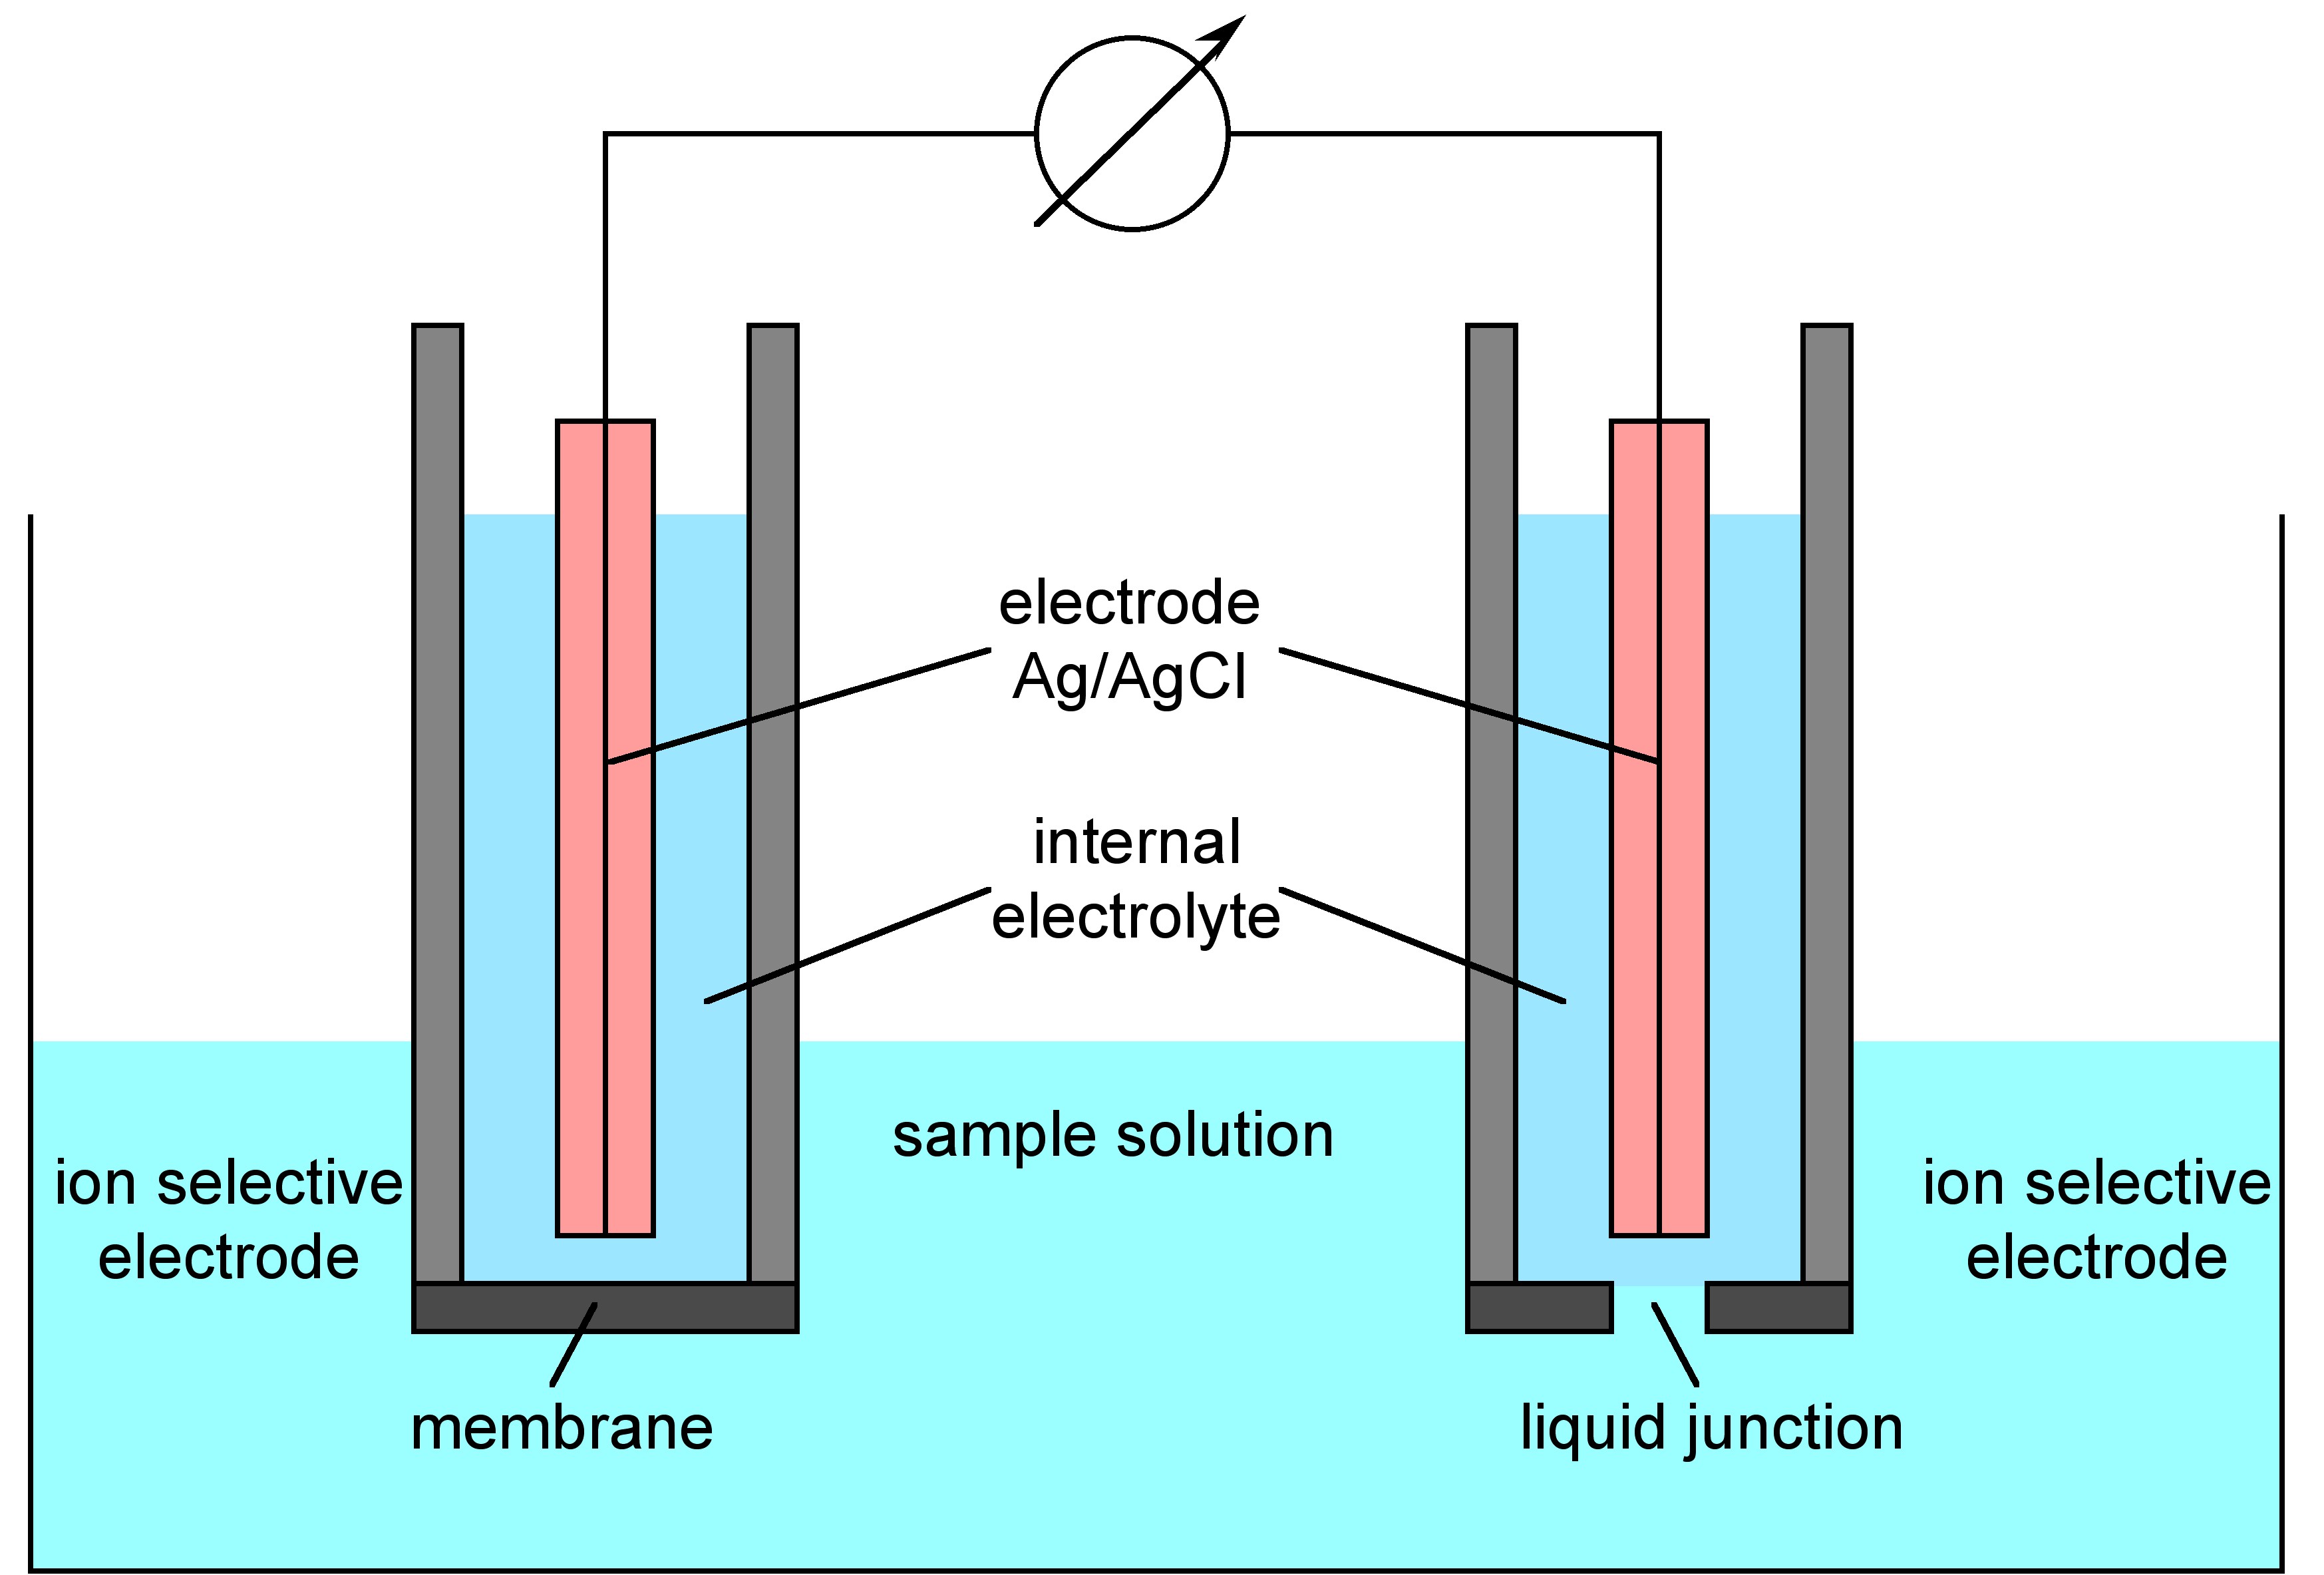 Measurement Setup  Ion Selective Electrode Analysis  By